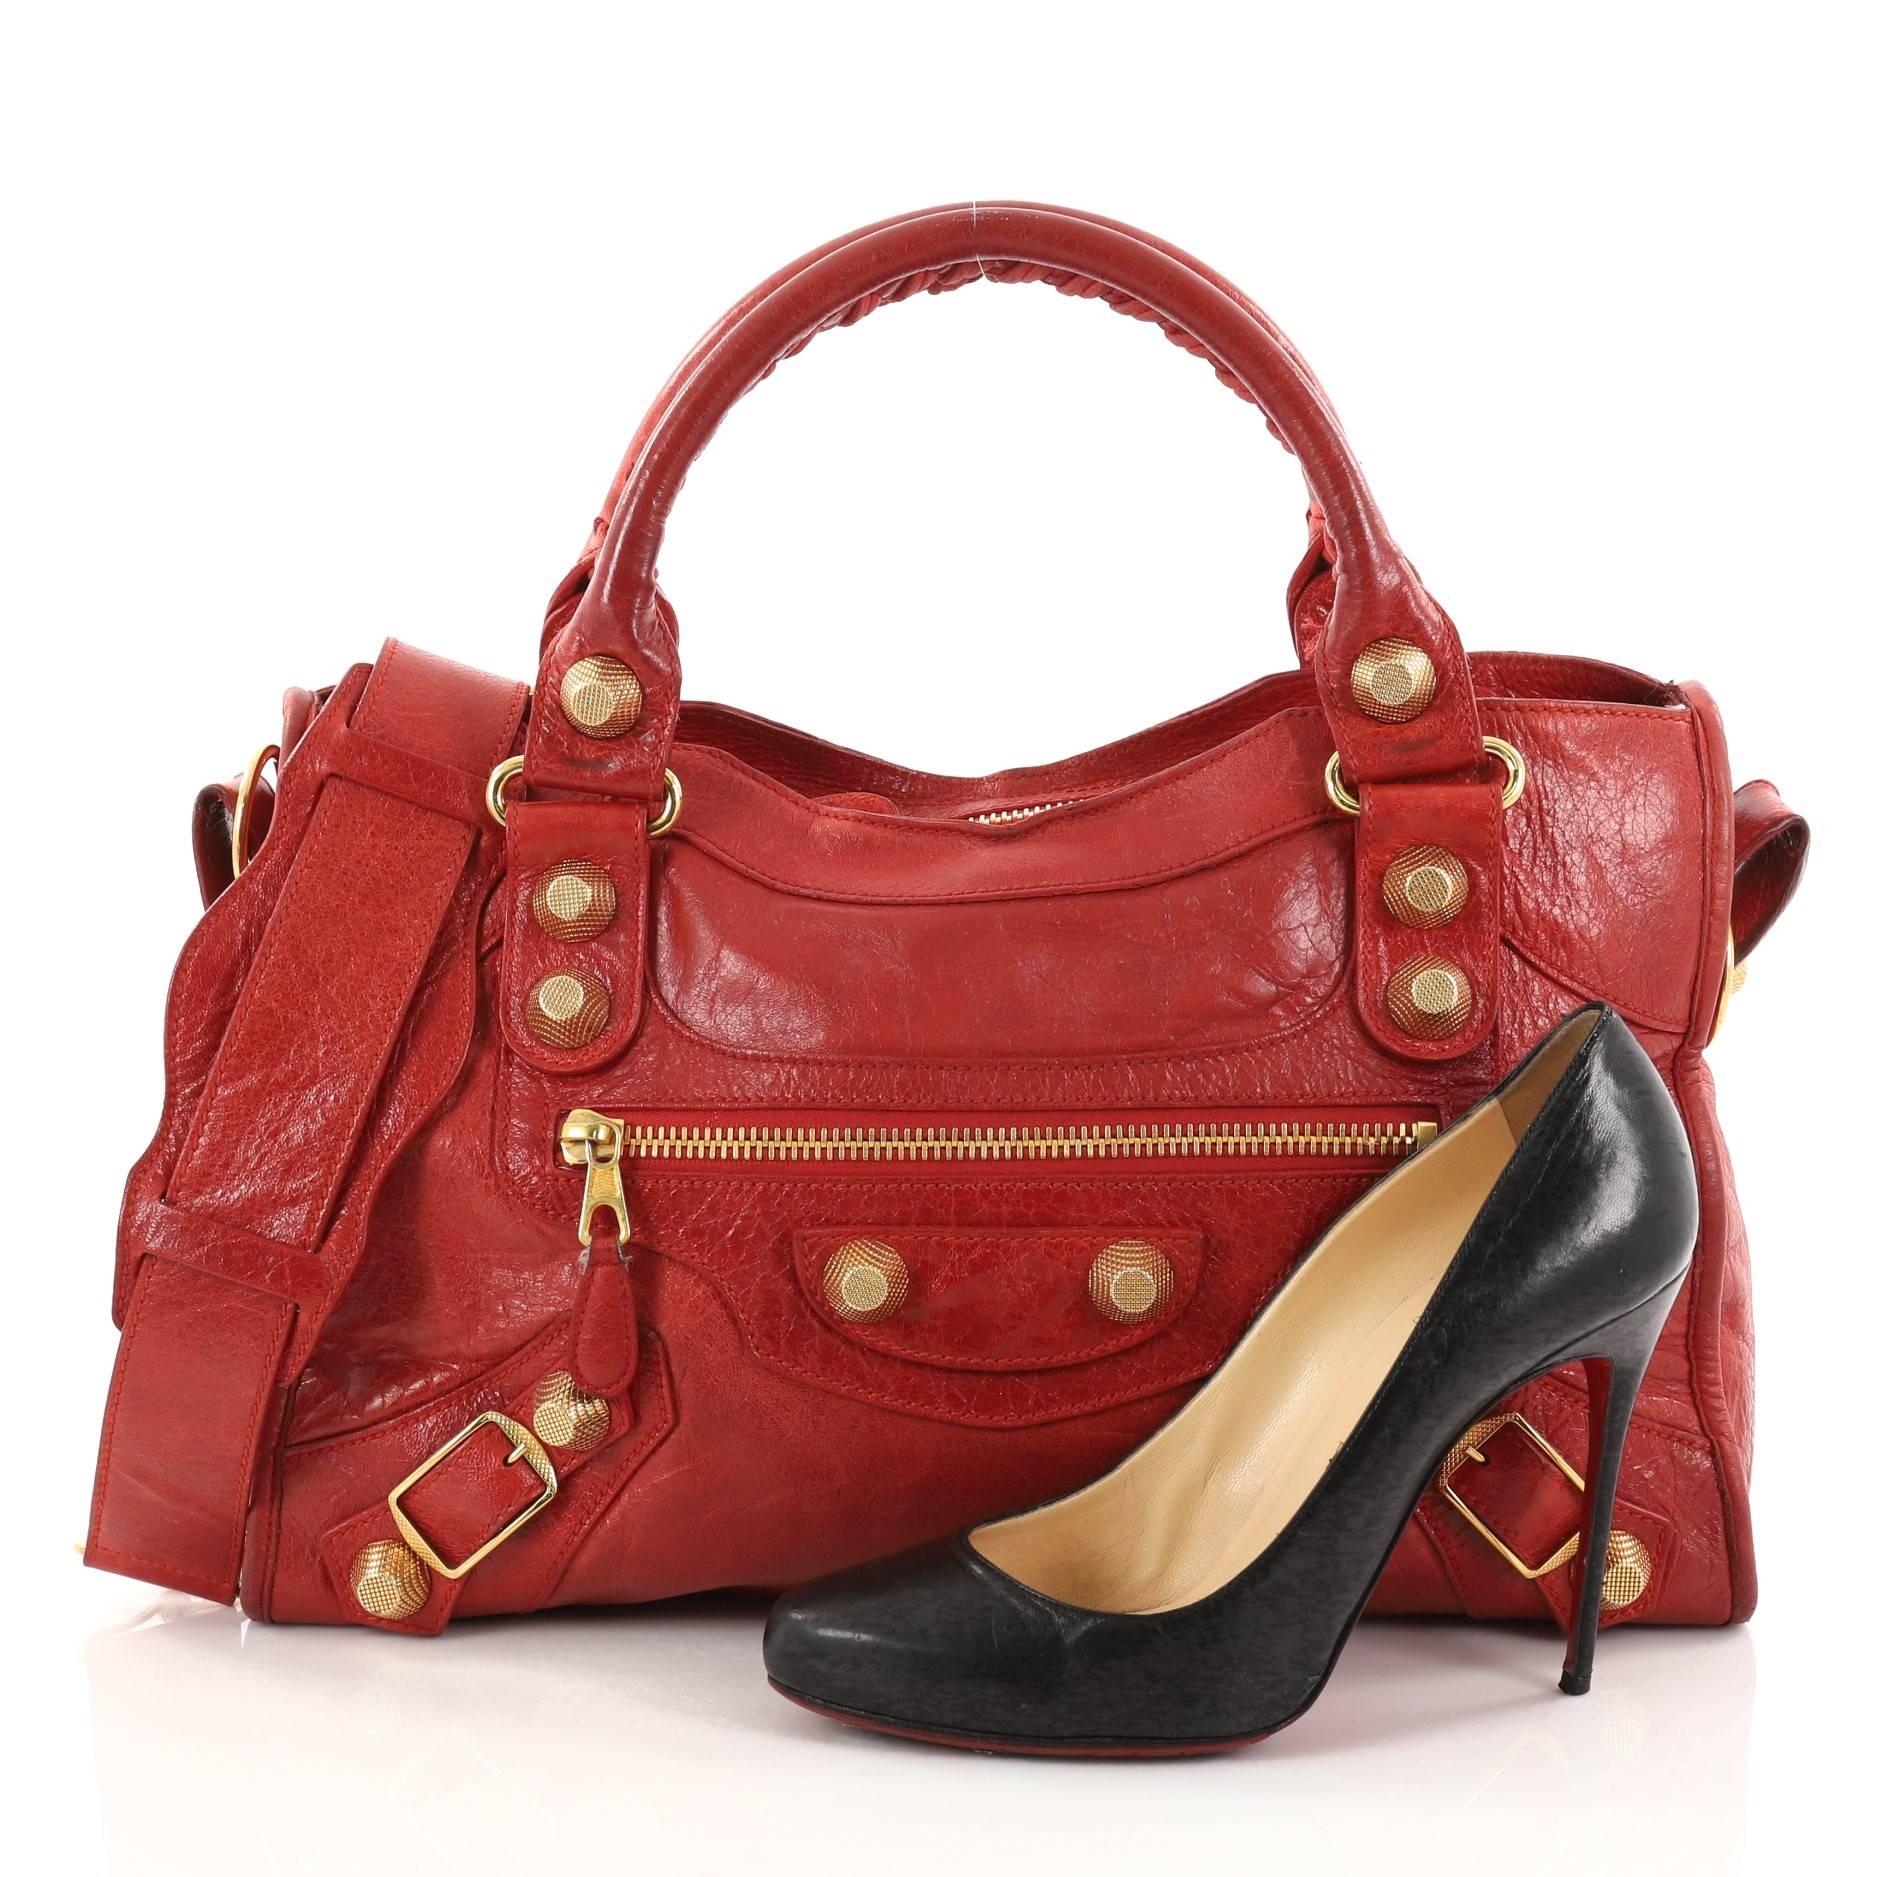 This authentic Balenciaga City Giant Studs Handbag Leather Medium is for the on-the-go fashionista. Constructed from red leather, this popular bag features dual braided woven tall handles, exterior front zip pocket, iconic Balenciaga giant studs and